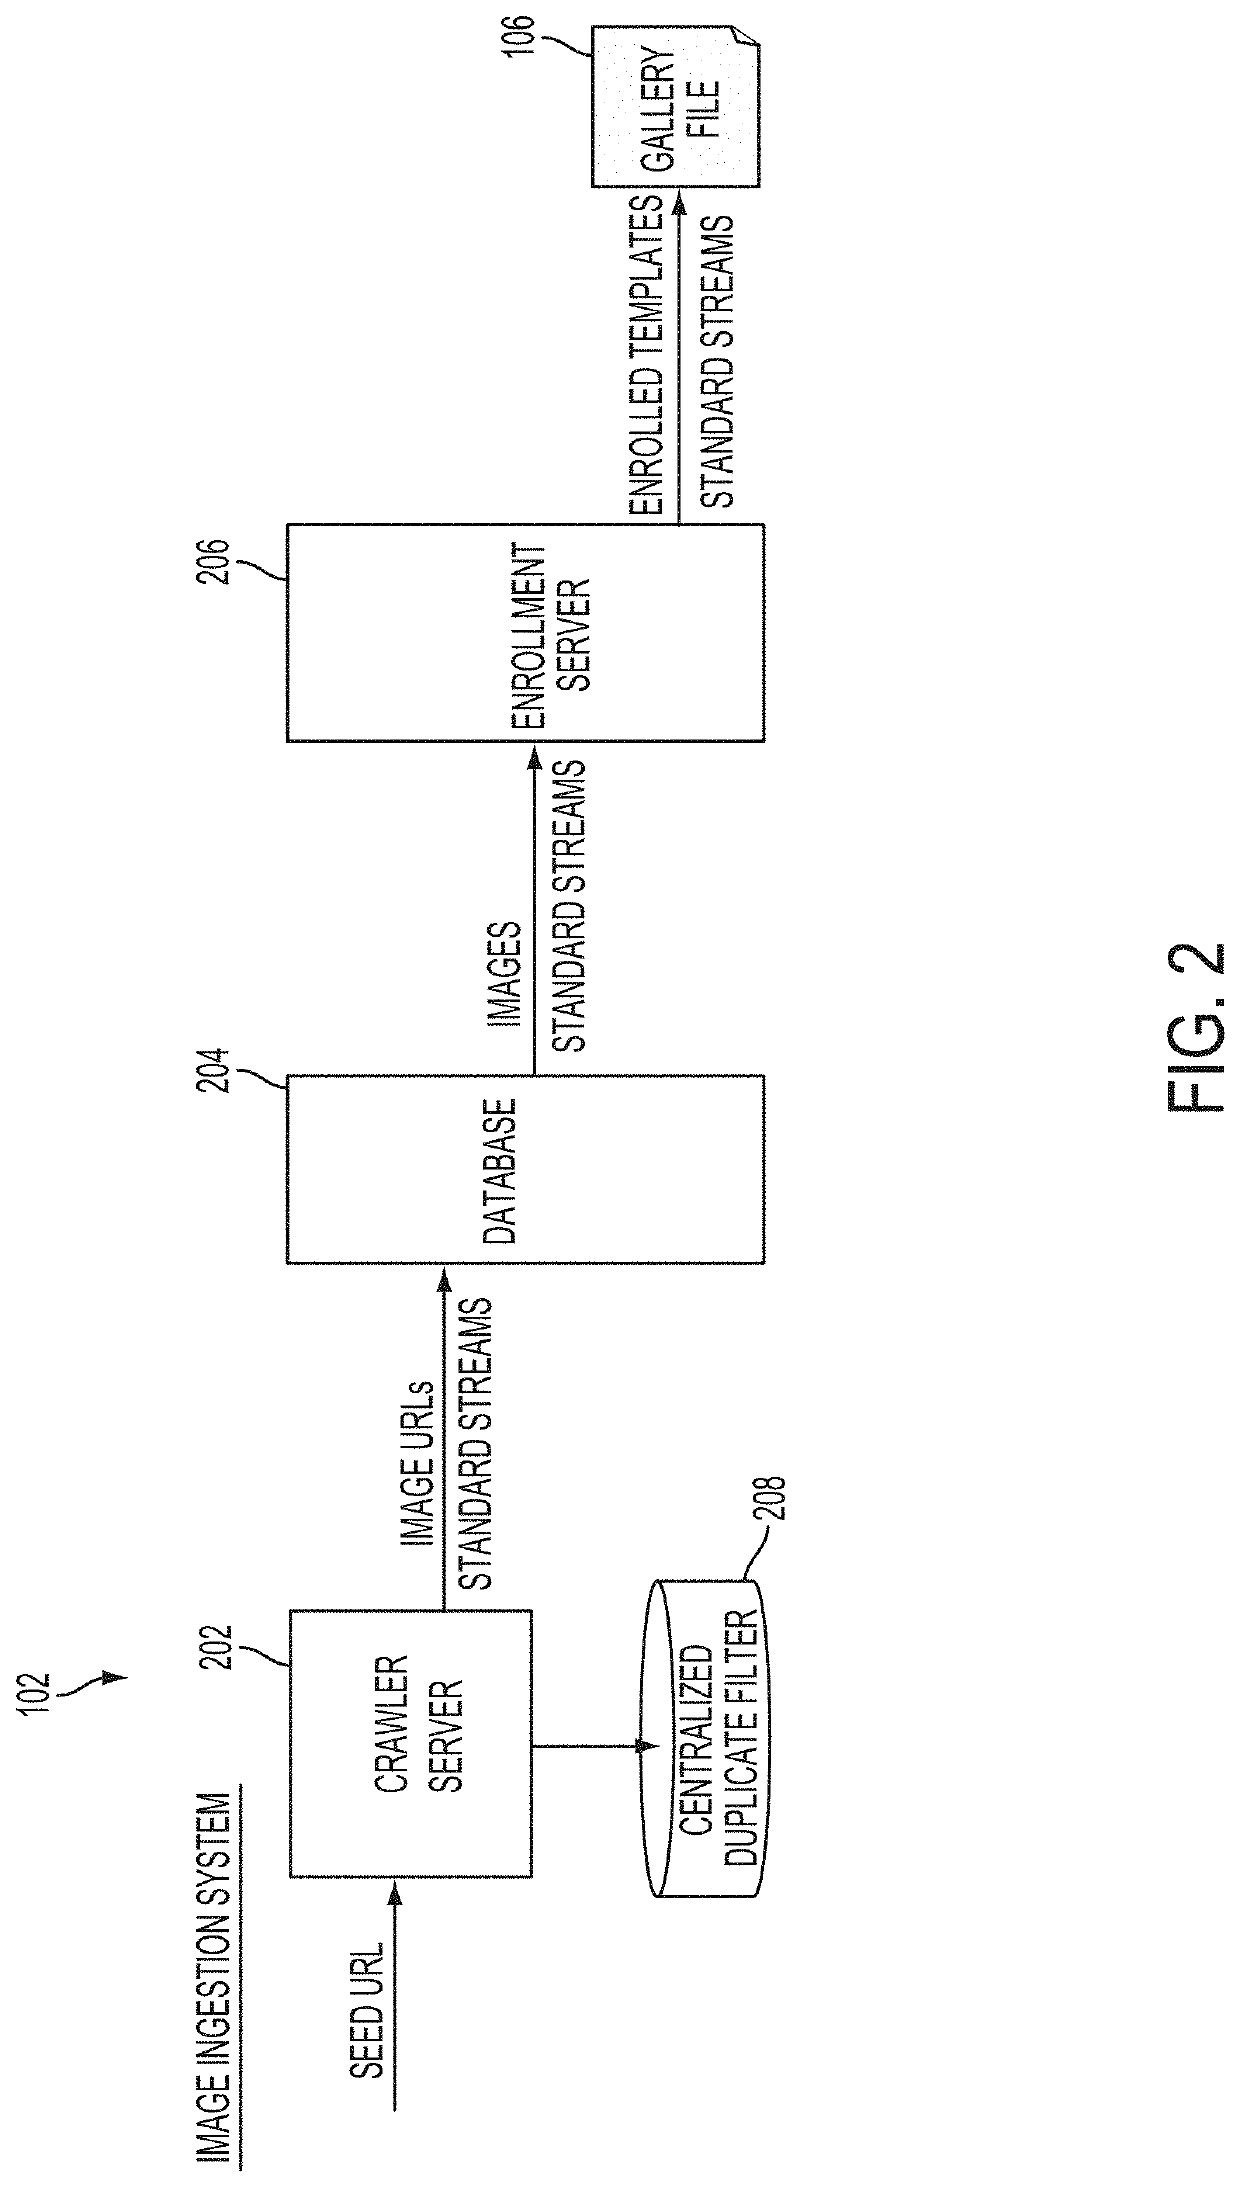 Face recognition and image search system using sparse feature vectors, compact binary vectors, and sub-linear search